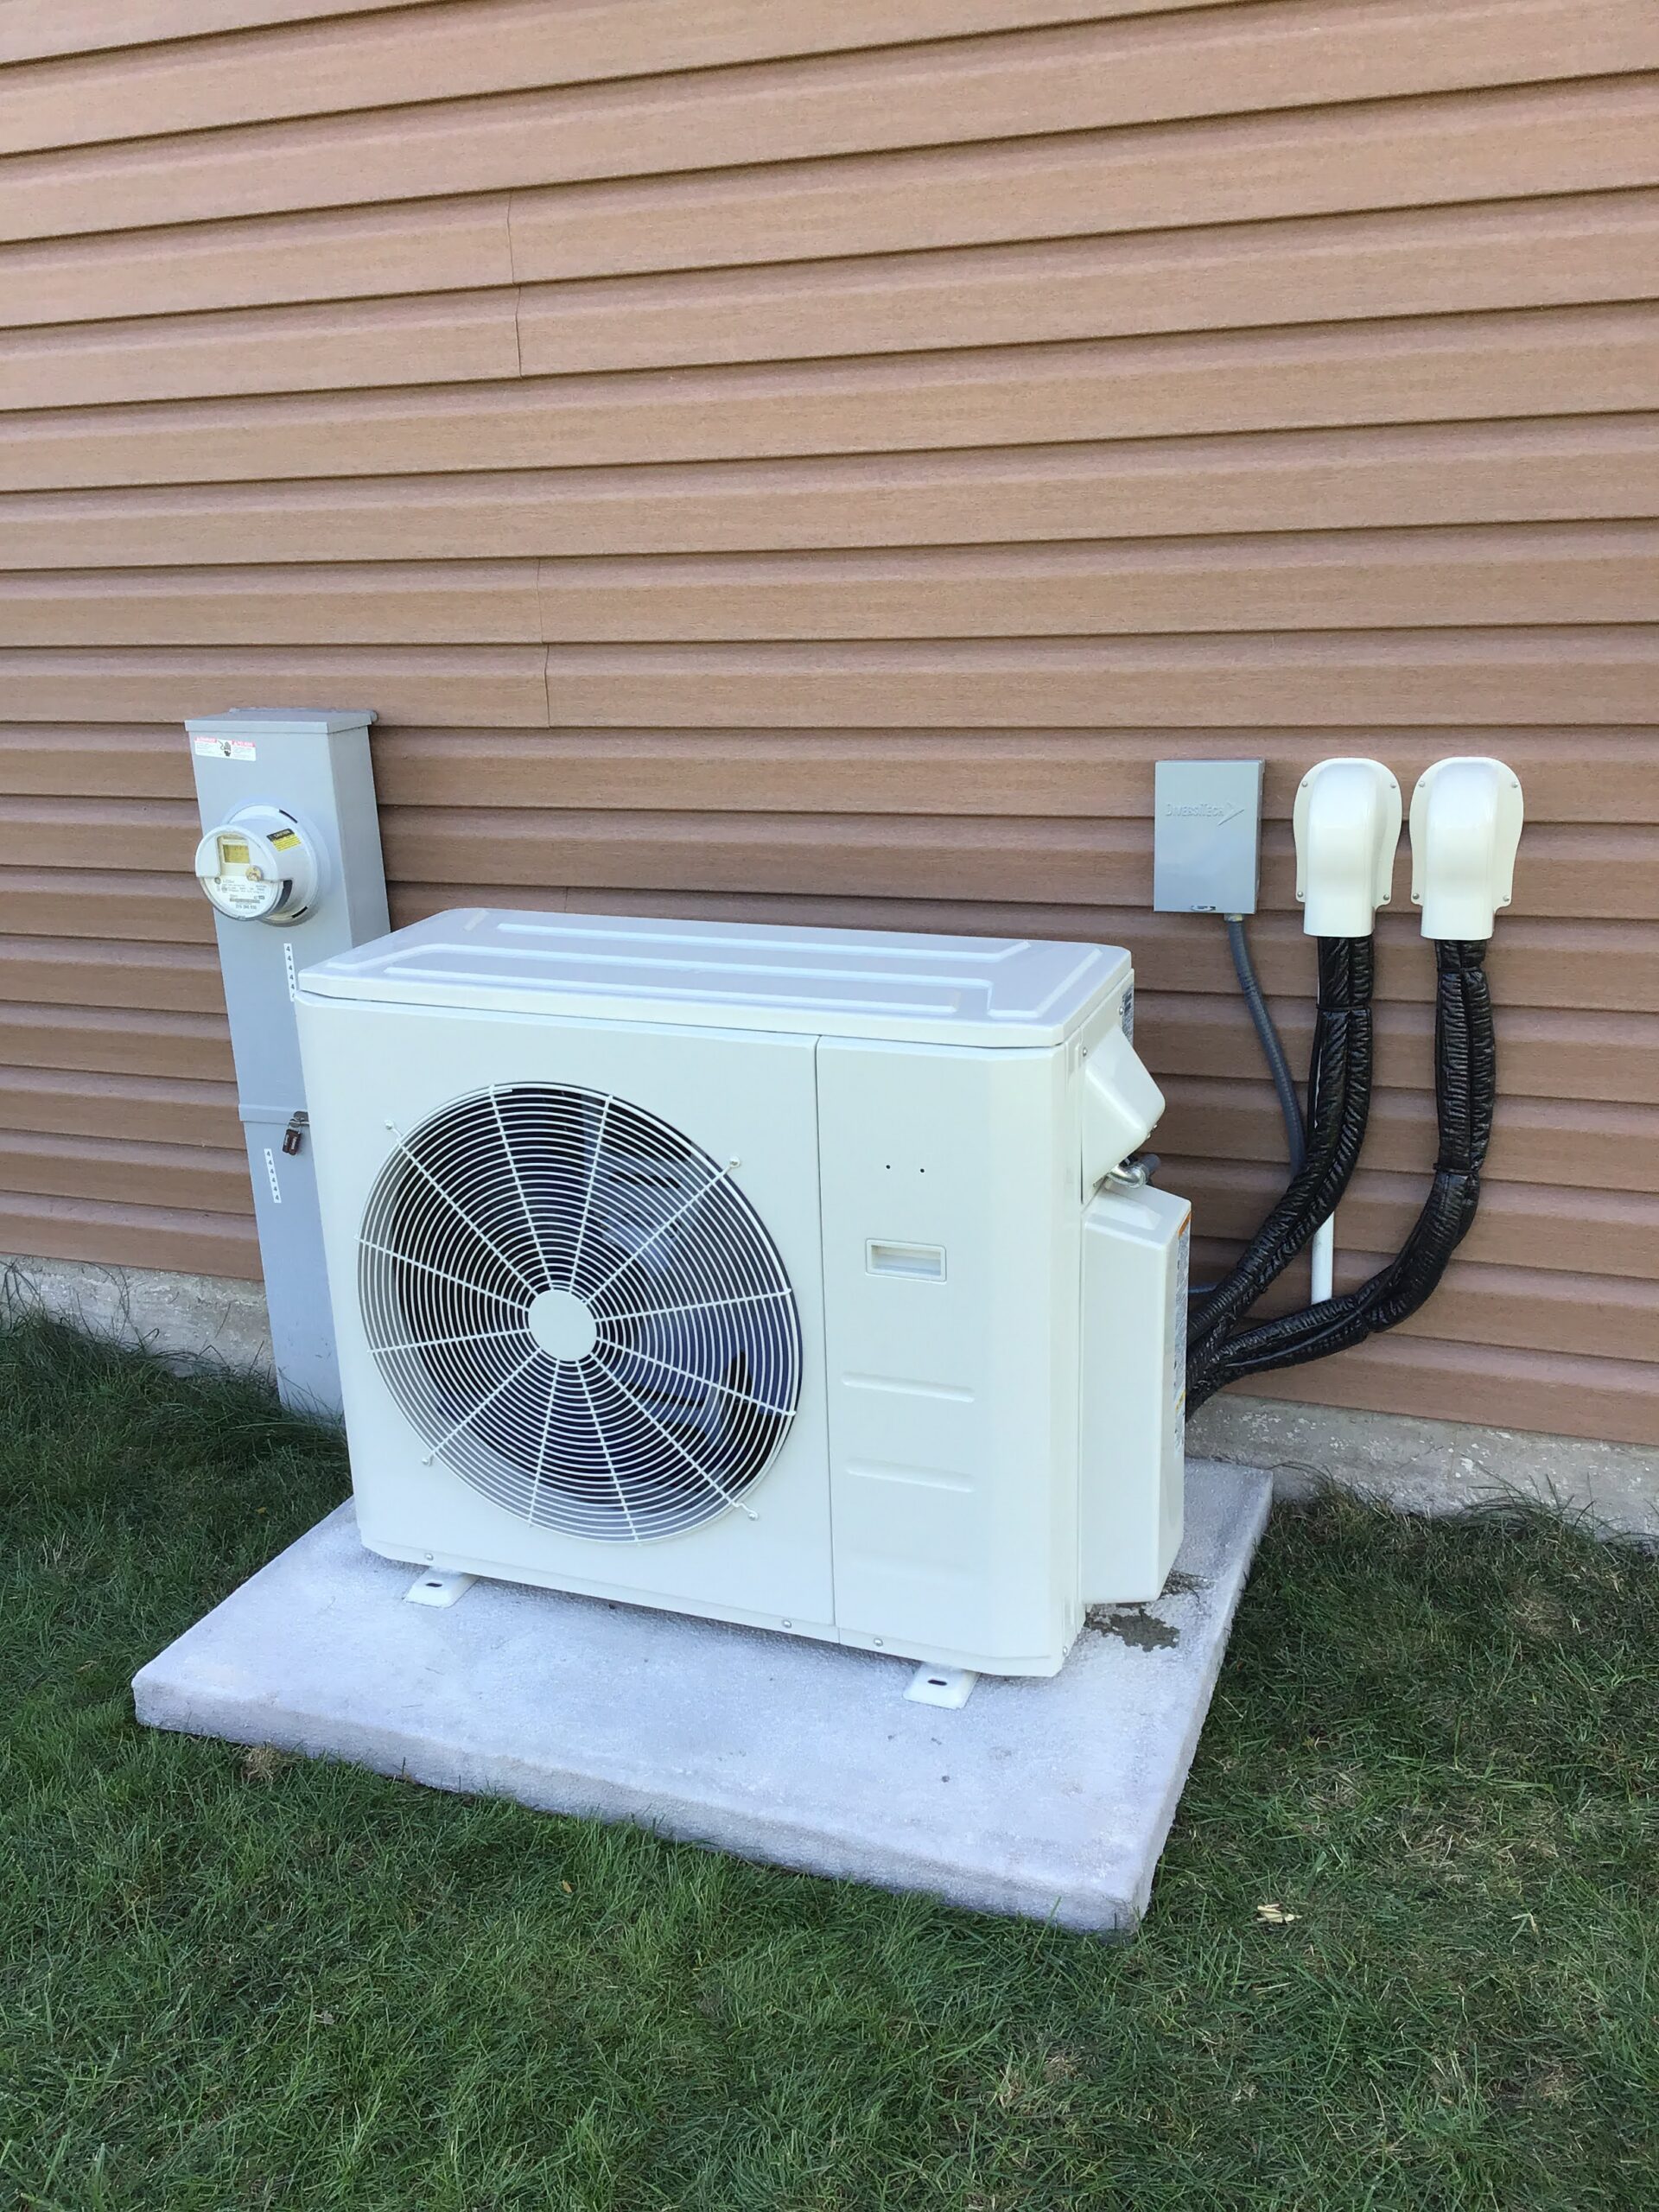 Ductless AC unit located outside of house